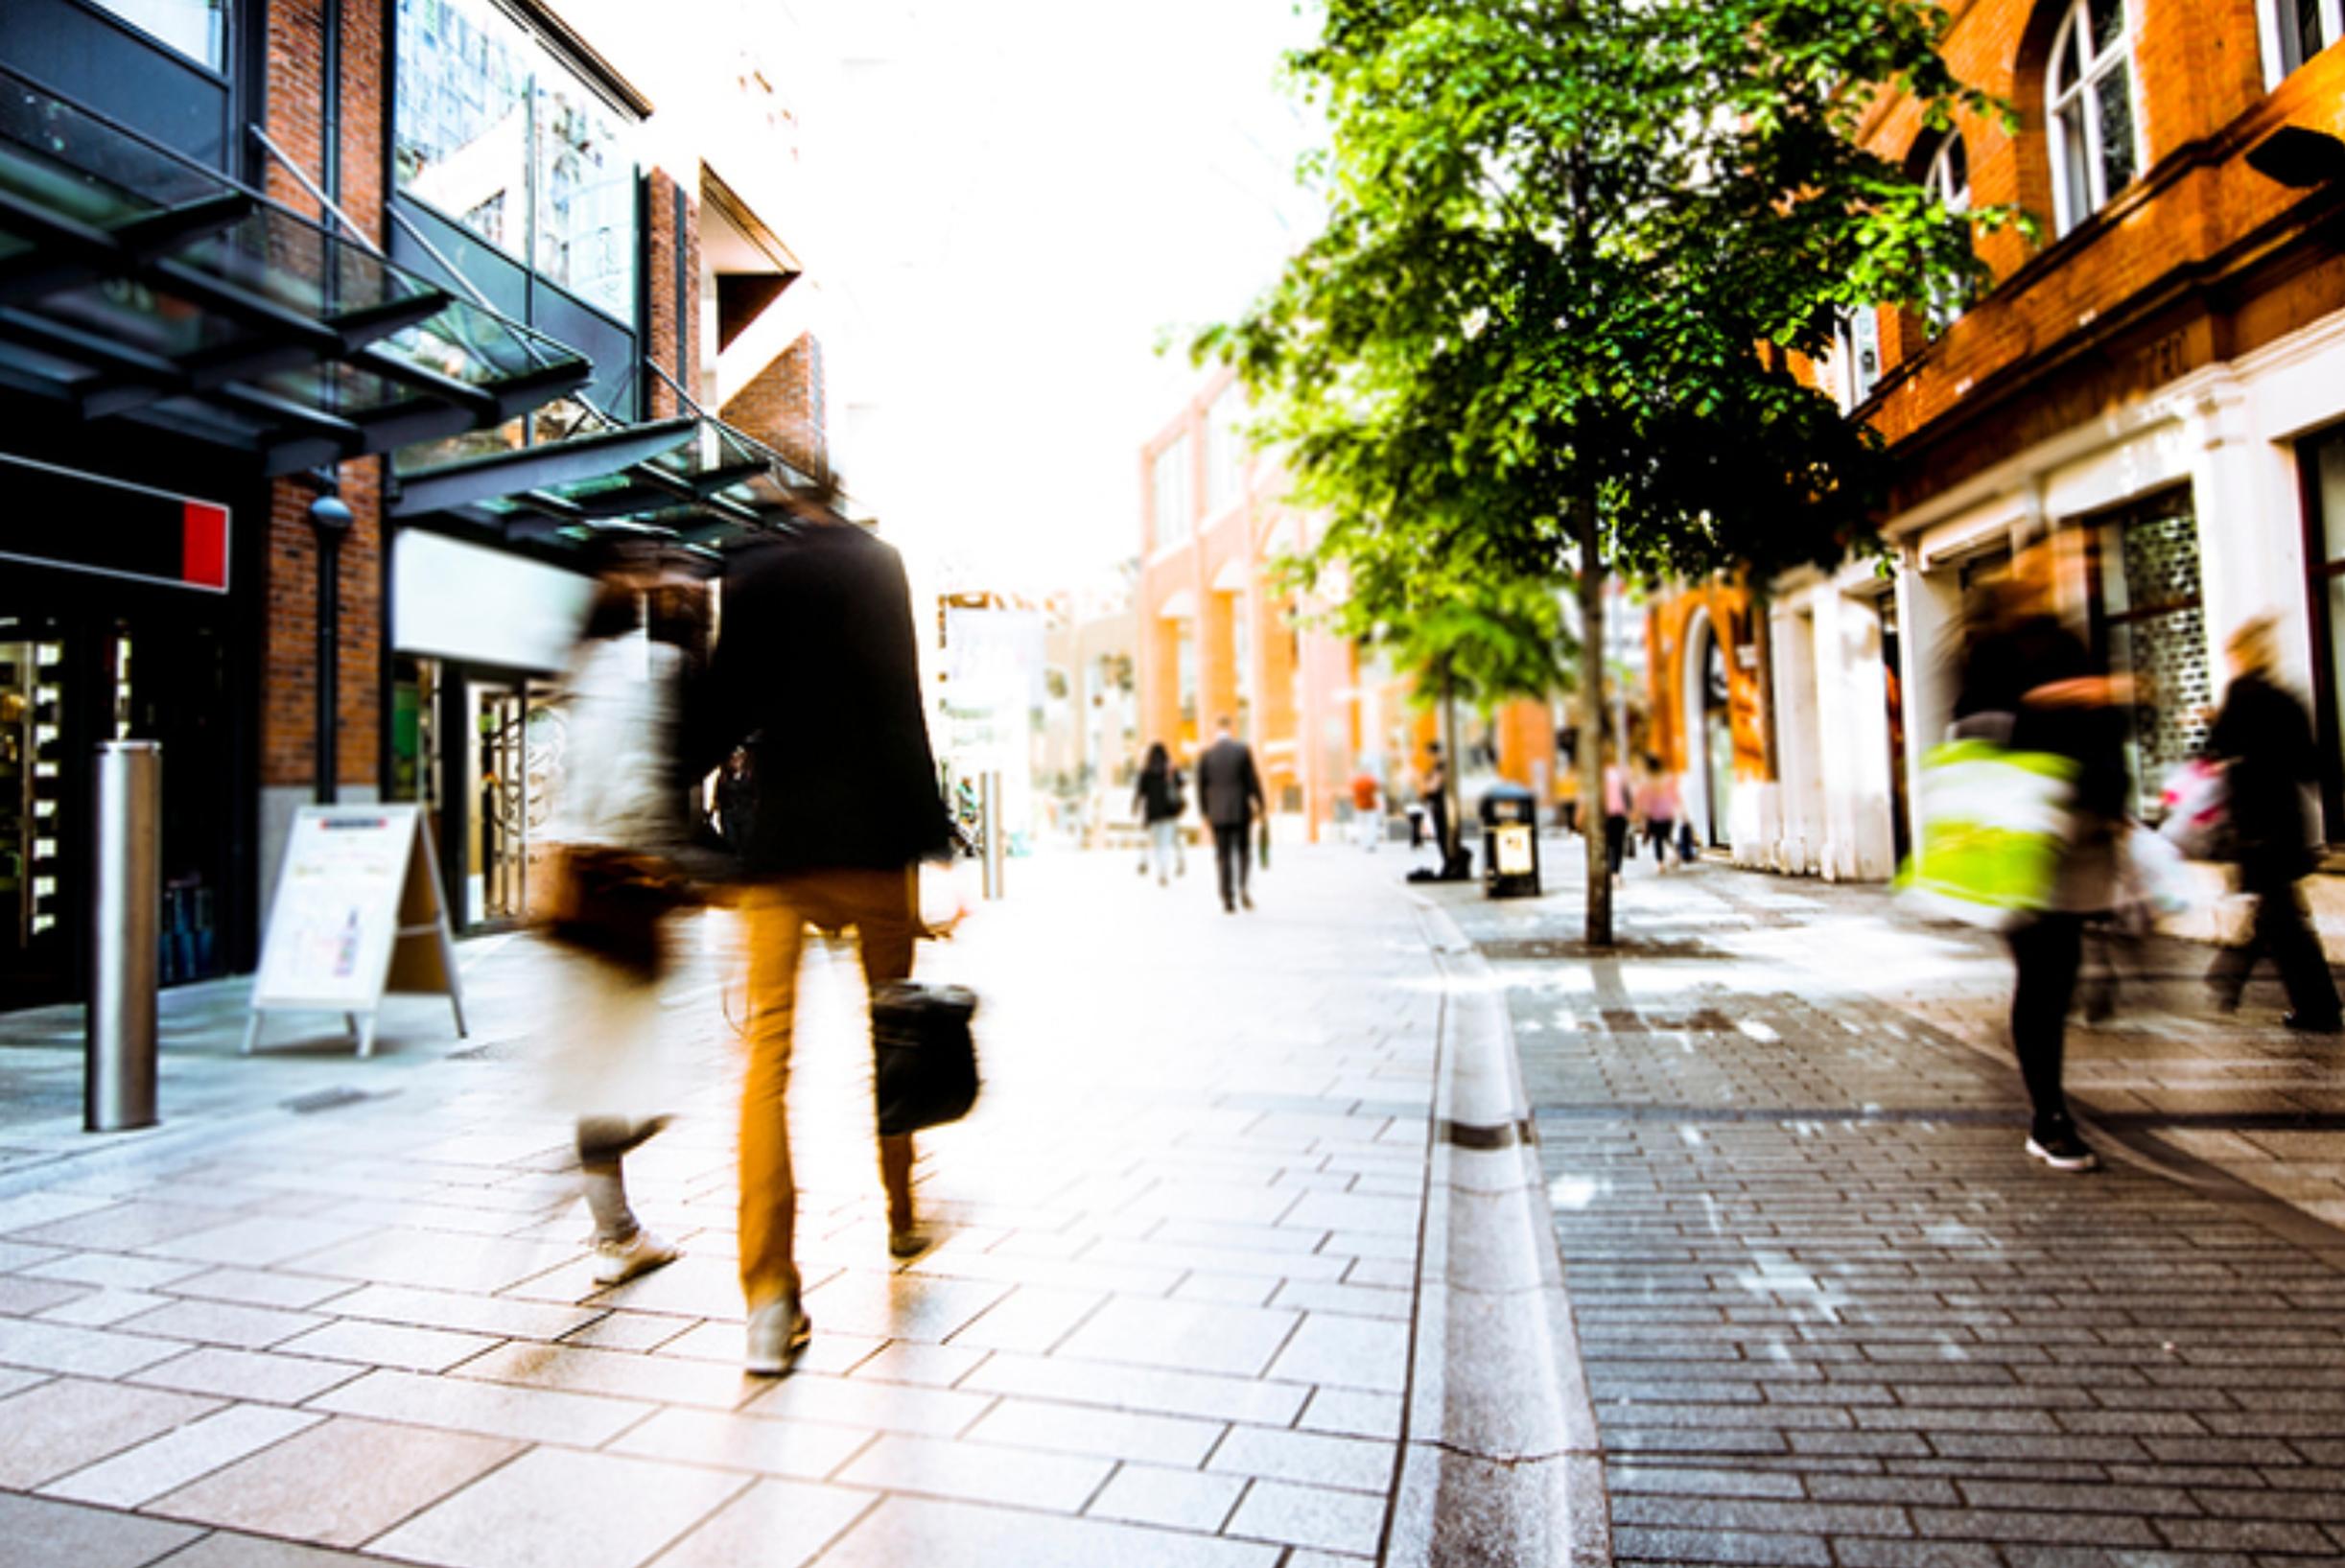 In total, 72 English high streets will share over £830m